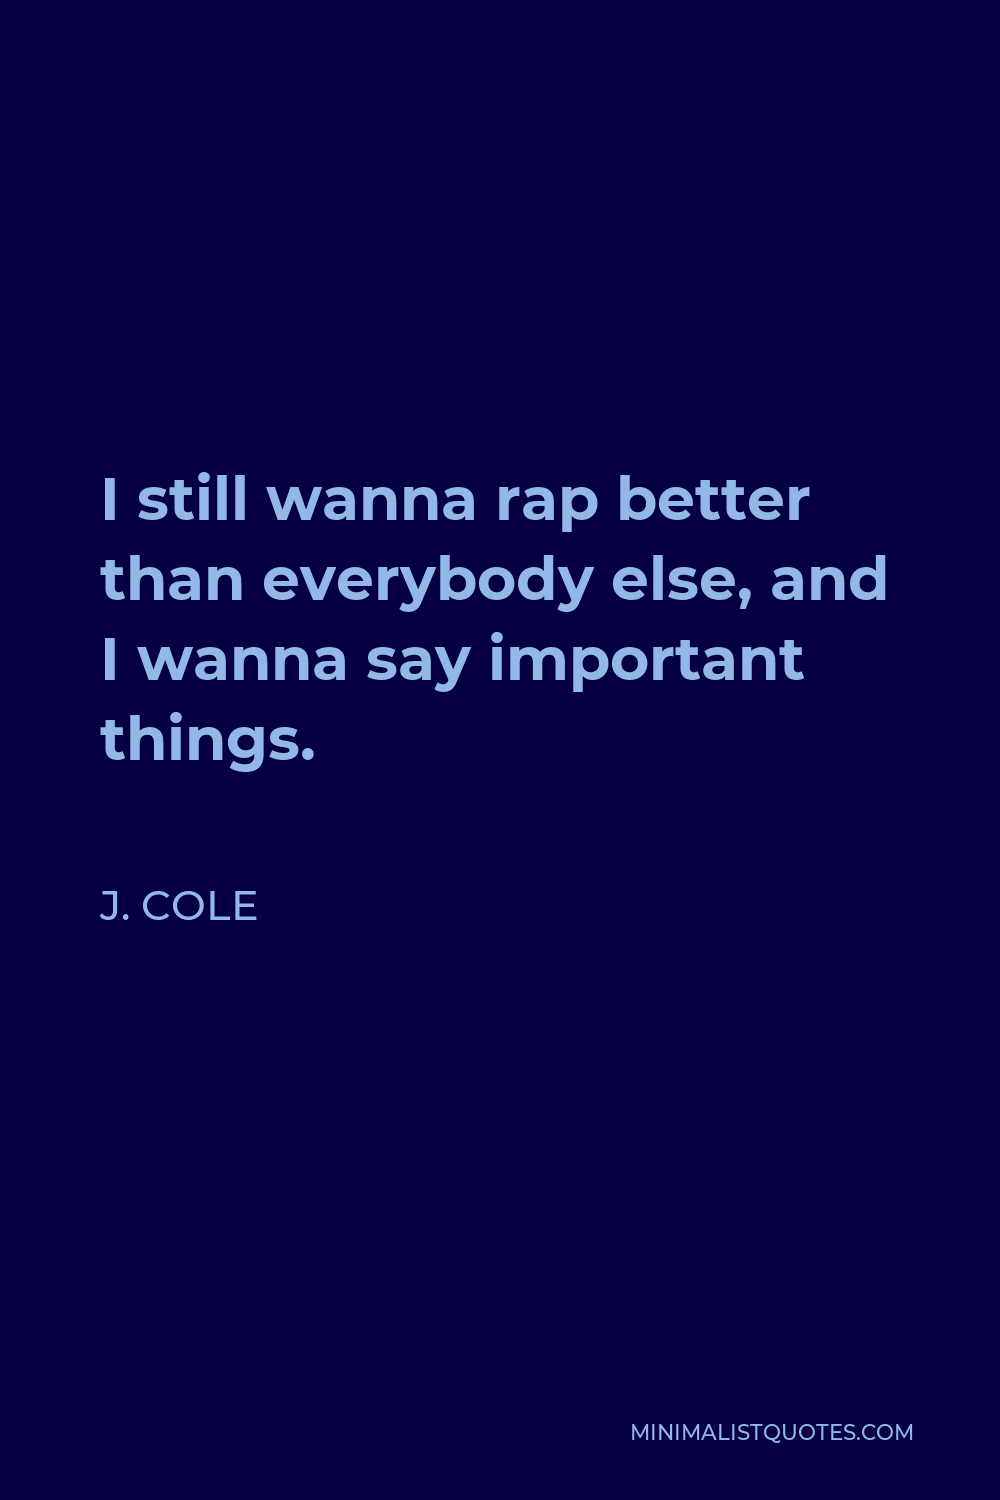 J. Cole Quote - I still wanna rap better than everybody else, and I wanna say important things.